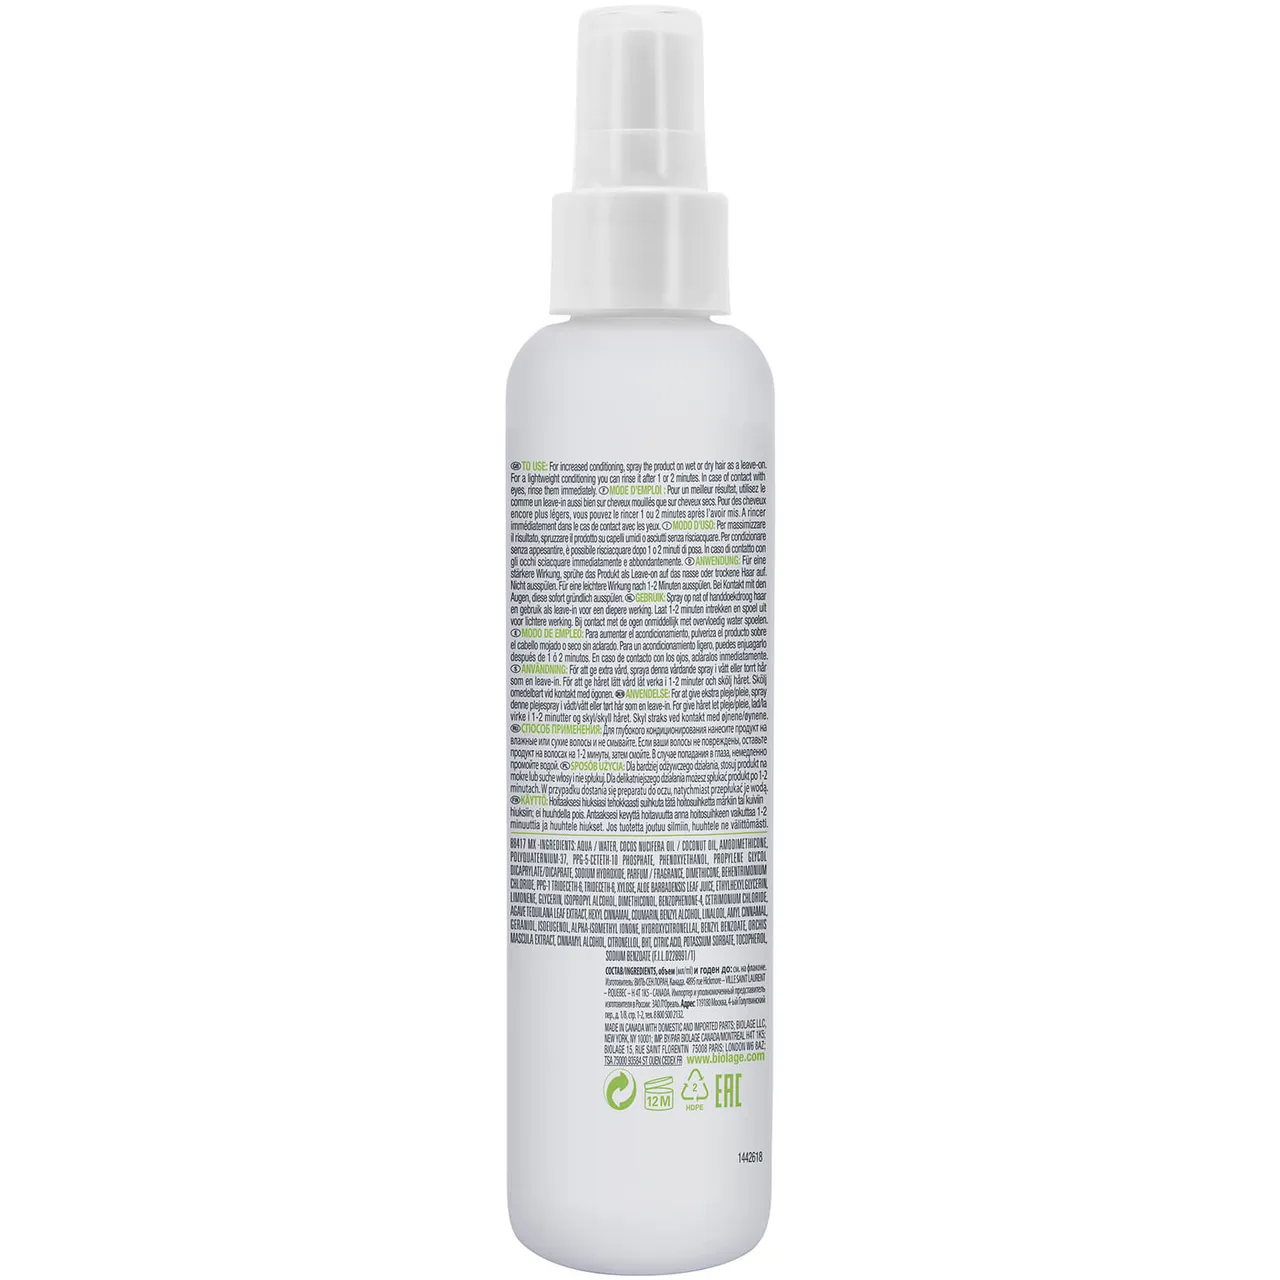 Biolage All-In-One Coconut Infusion Multi-Benefit Leave-In Spray for All Hair Types 150ml